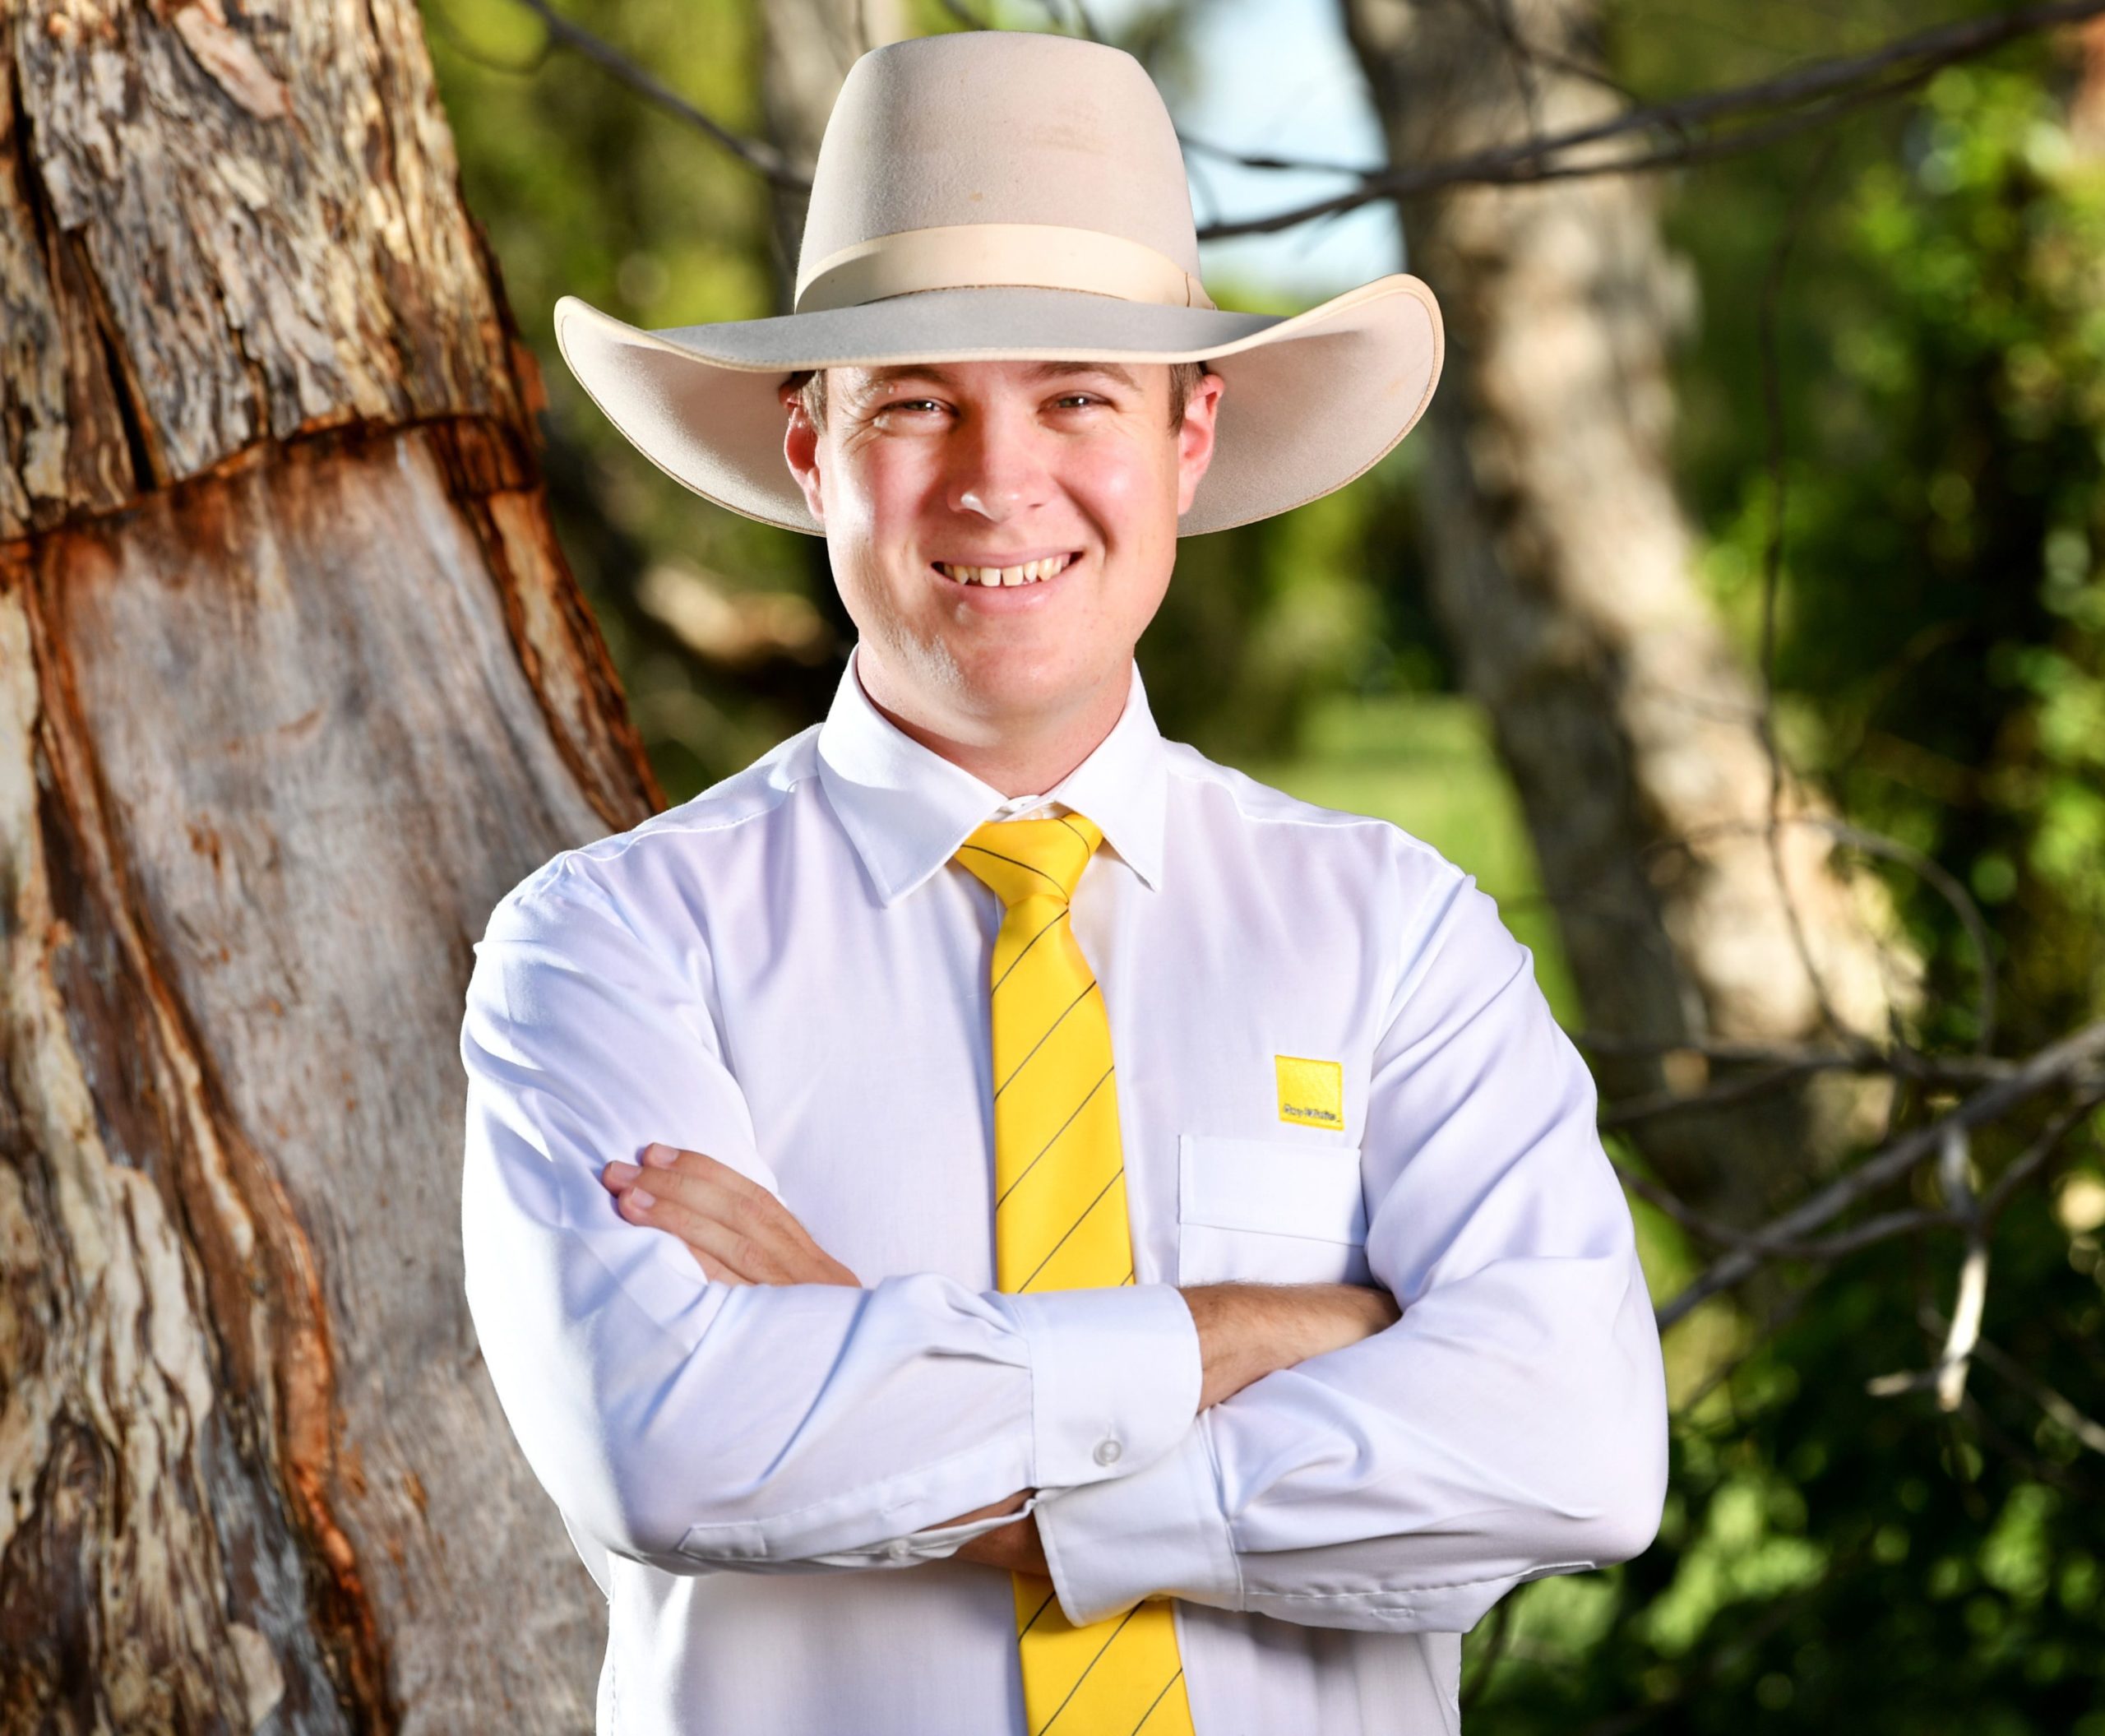 APRIL 6, 2021: TOWNSVILLE, QLD. Auctioneer Liam Kirkwood poses during a photo shoot in Townsville, Queensland. (Photo by Alix Sweeney / Newspix)
Contact Email: newspix@newsltd.com.au
Contact Web URL: www.newspix.com.au
Contact Email: newspix@newsltd.com.au